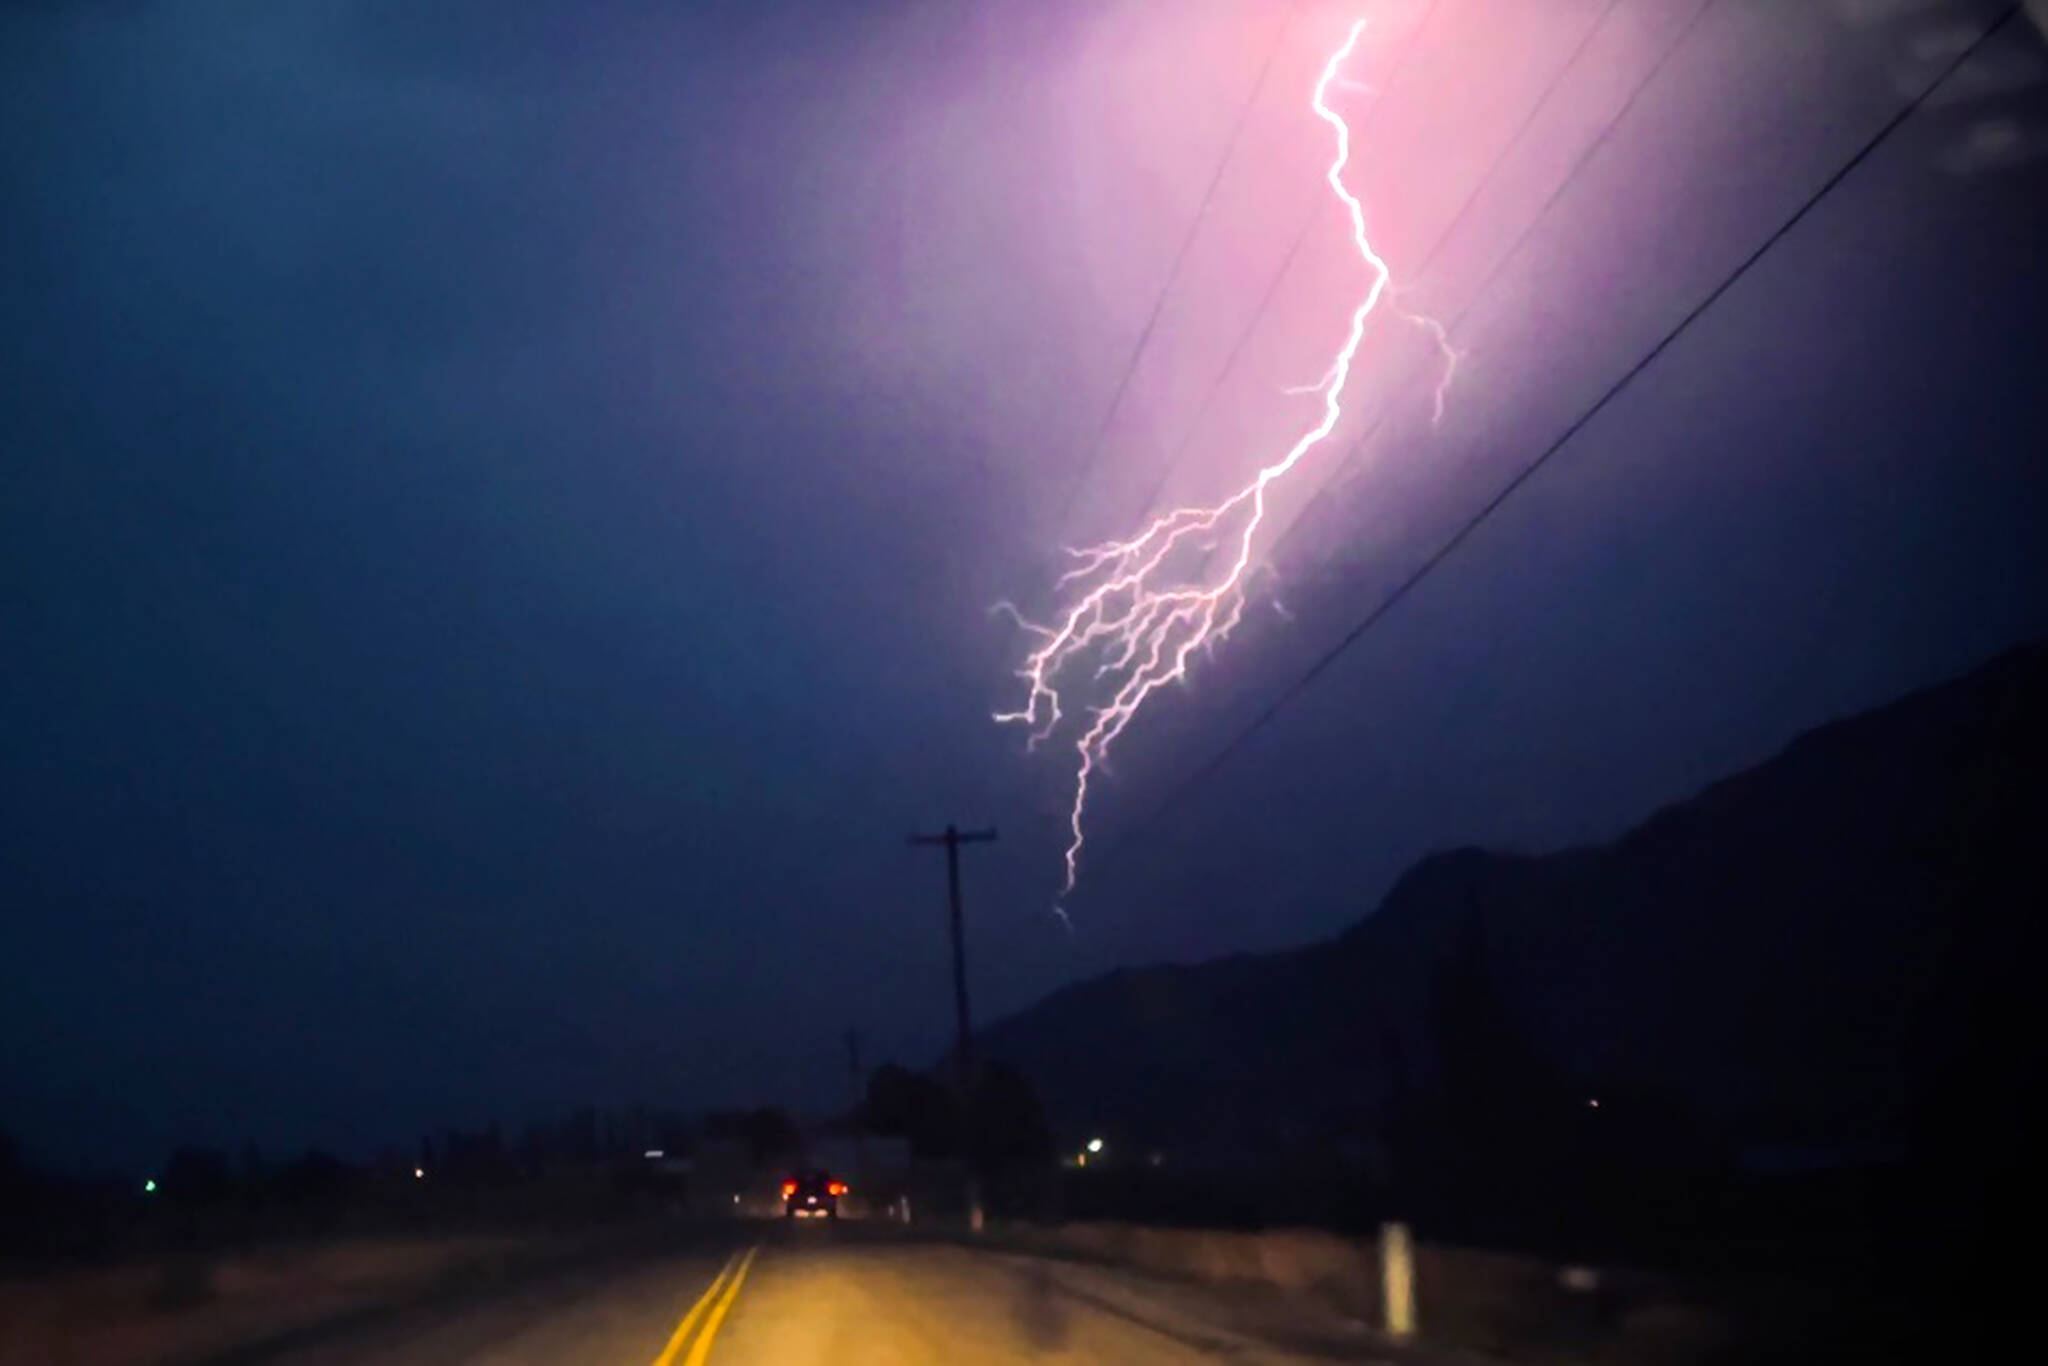 A thunderstorm is seen Aug. 3, 2021, in Okanogan County, Washington. (Kathryn Knowlton/submitted photo)